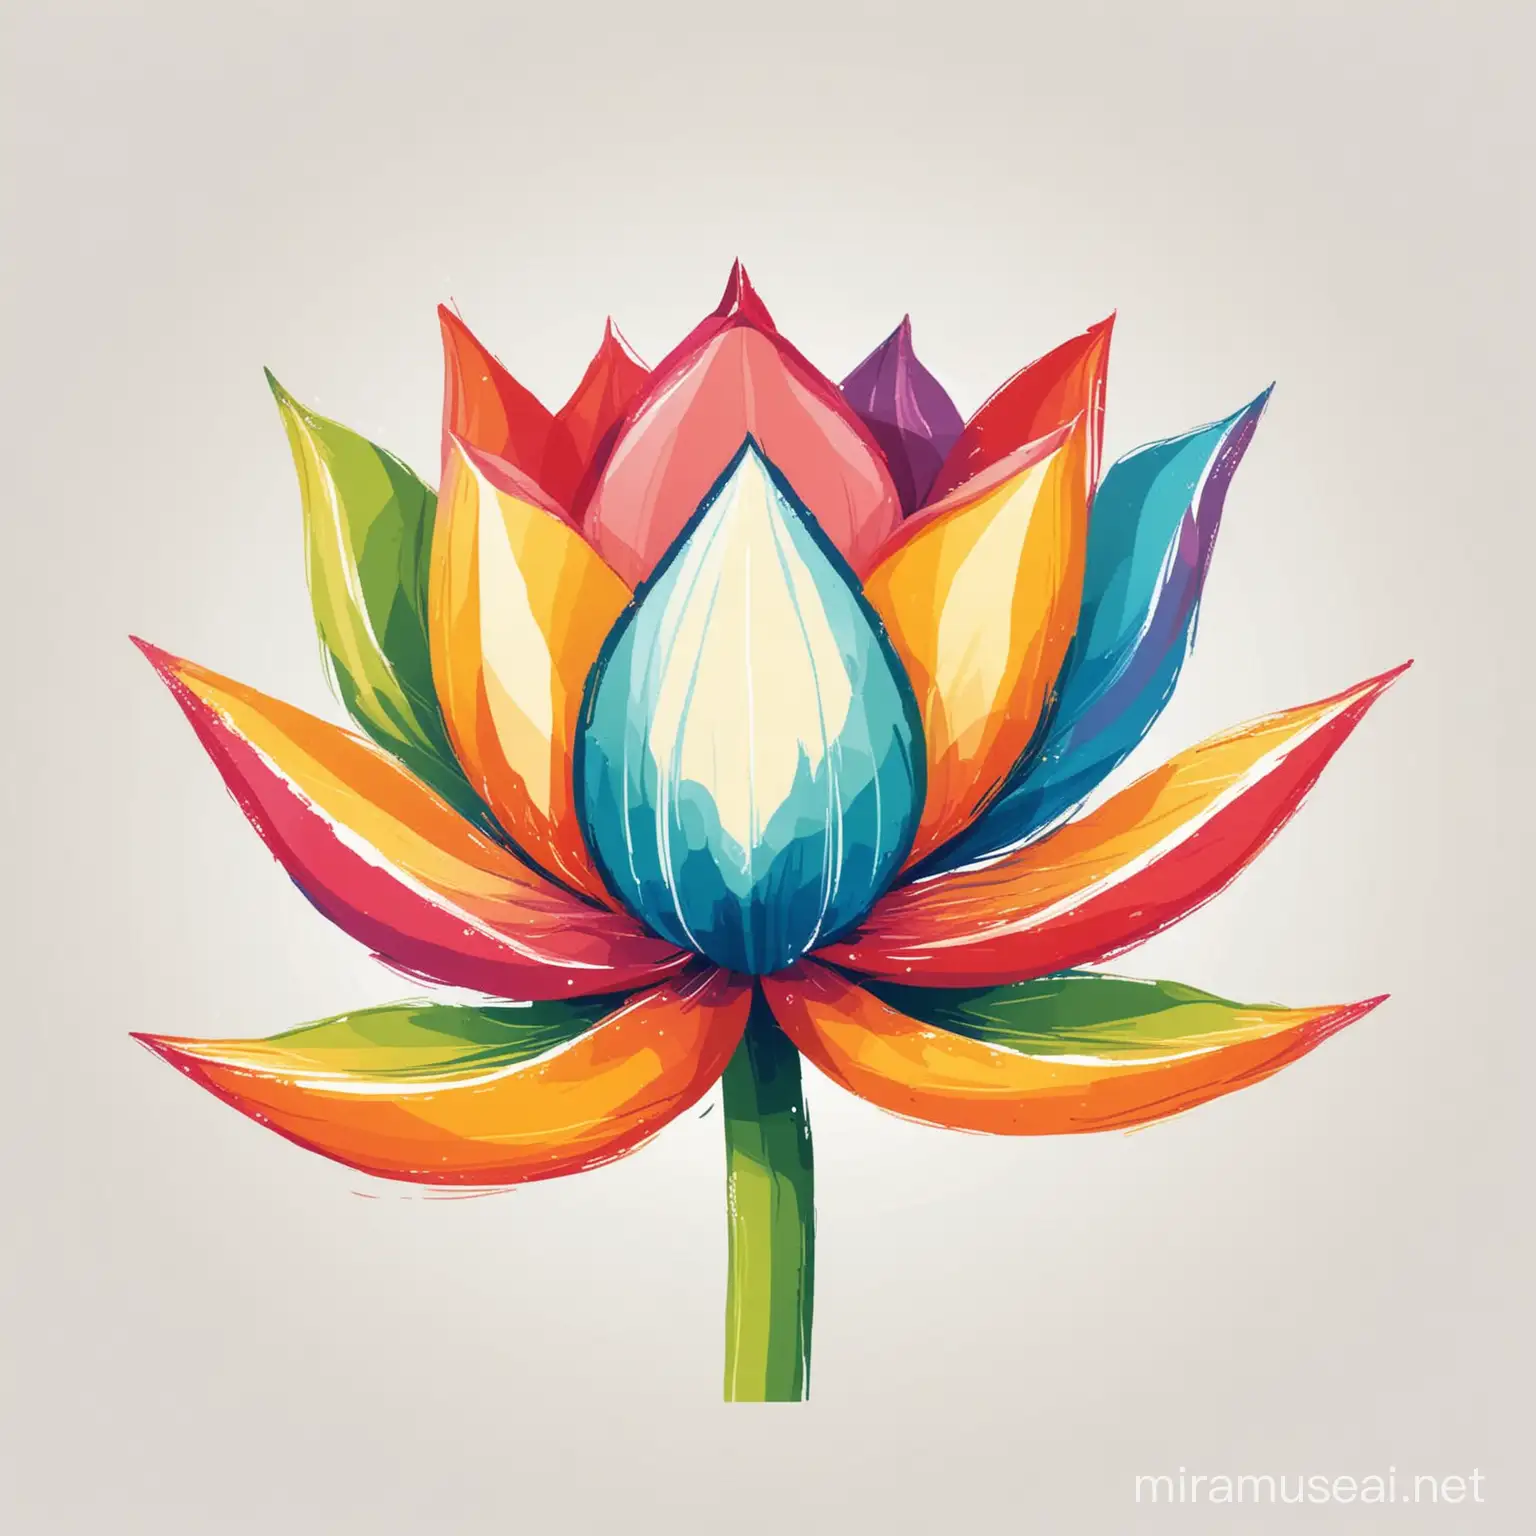 colorful one lotus, side view, bright colors, t-shirt design, symmetrical, vector, flat illustration, white background